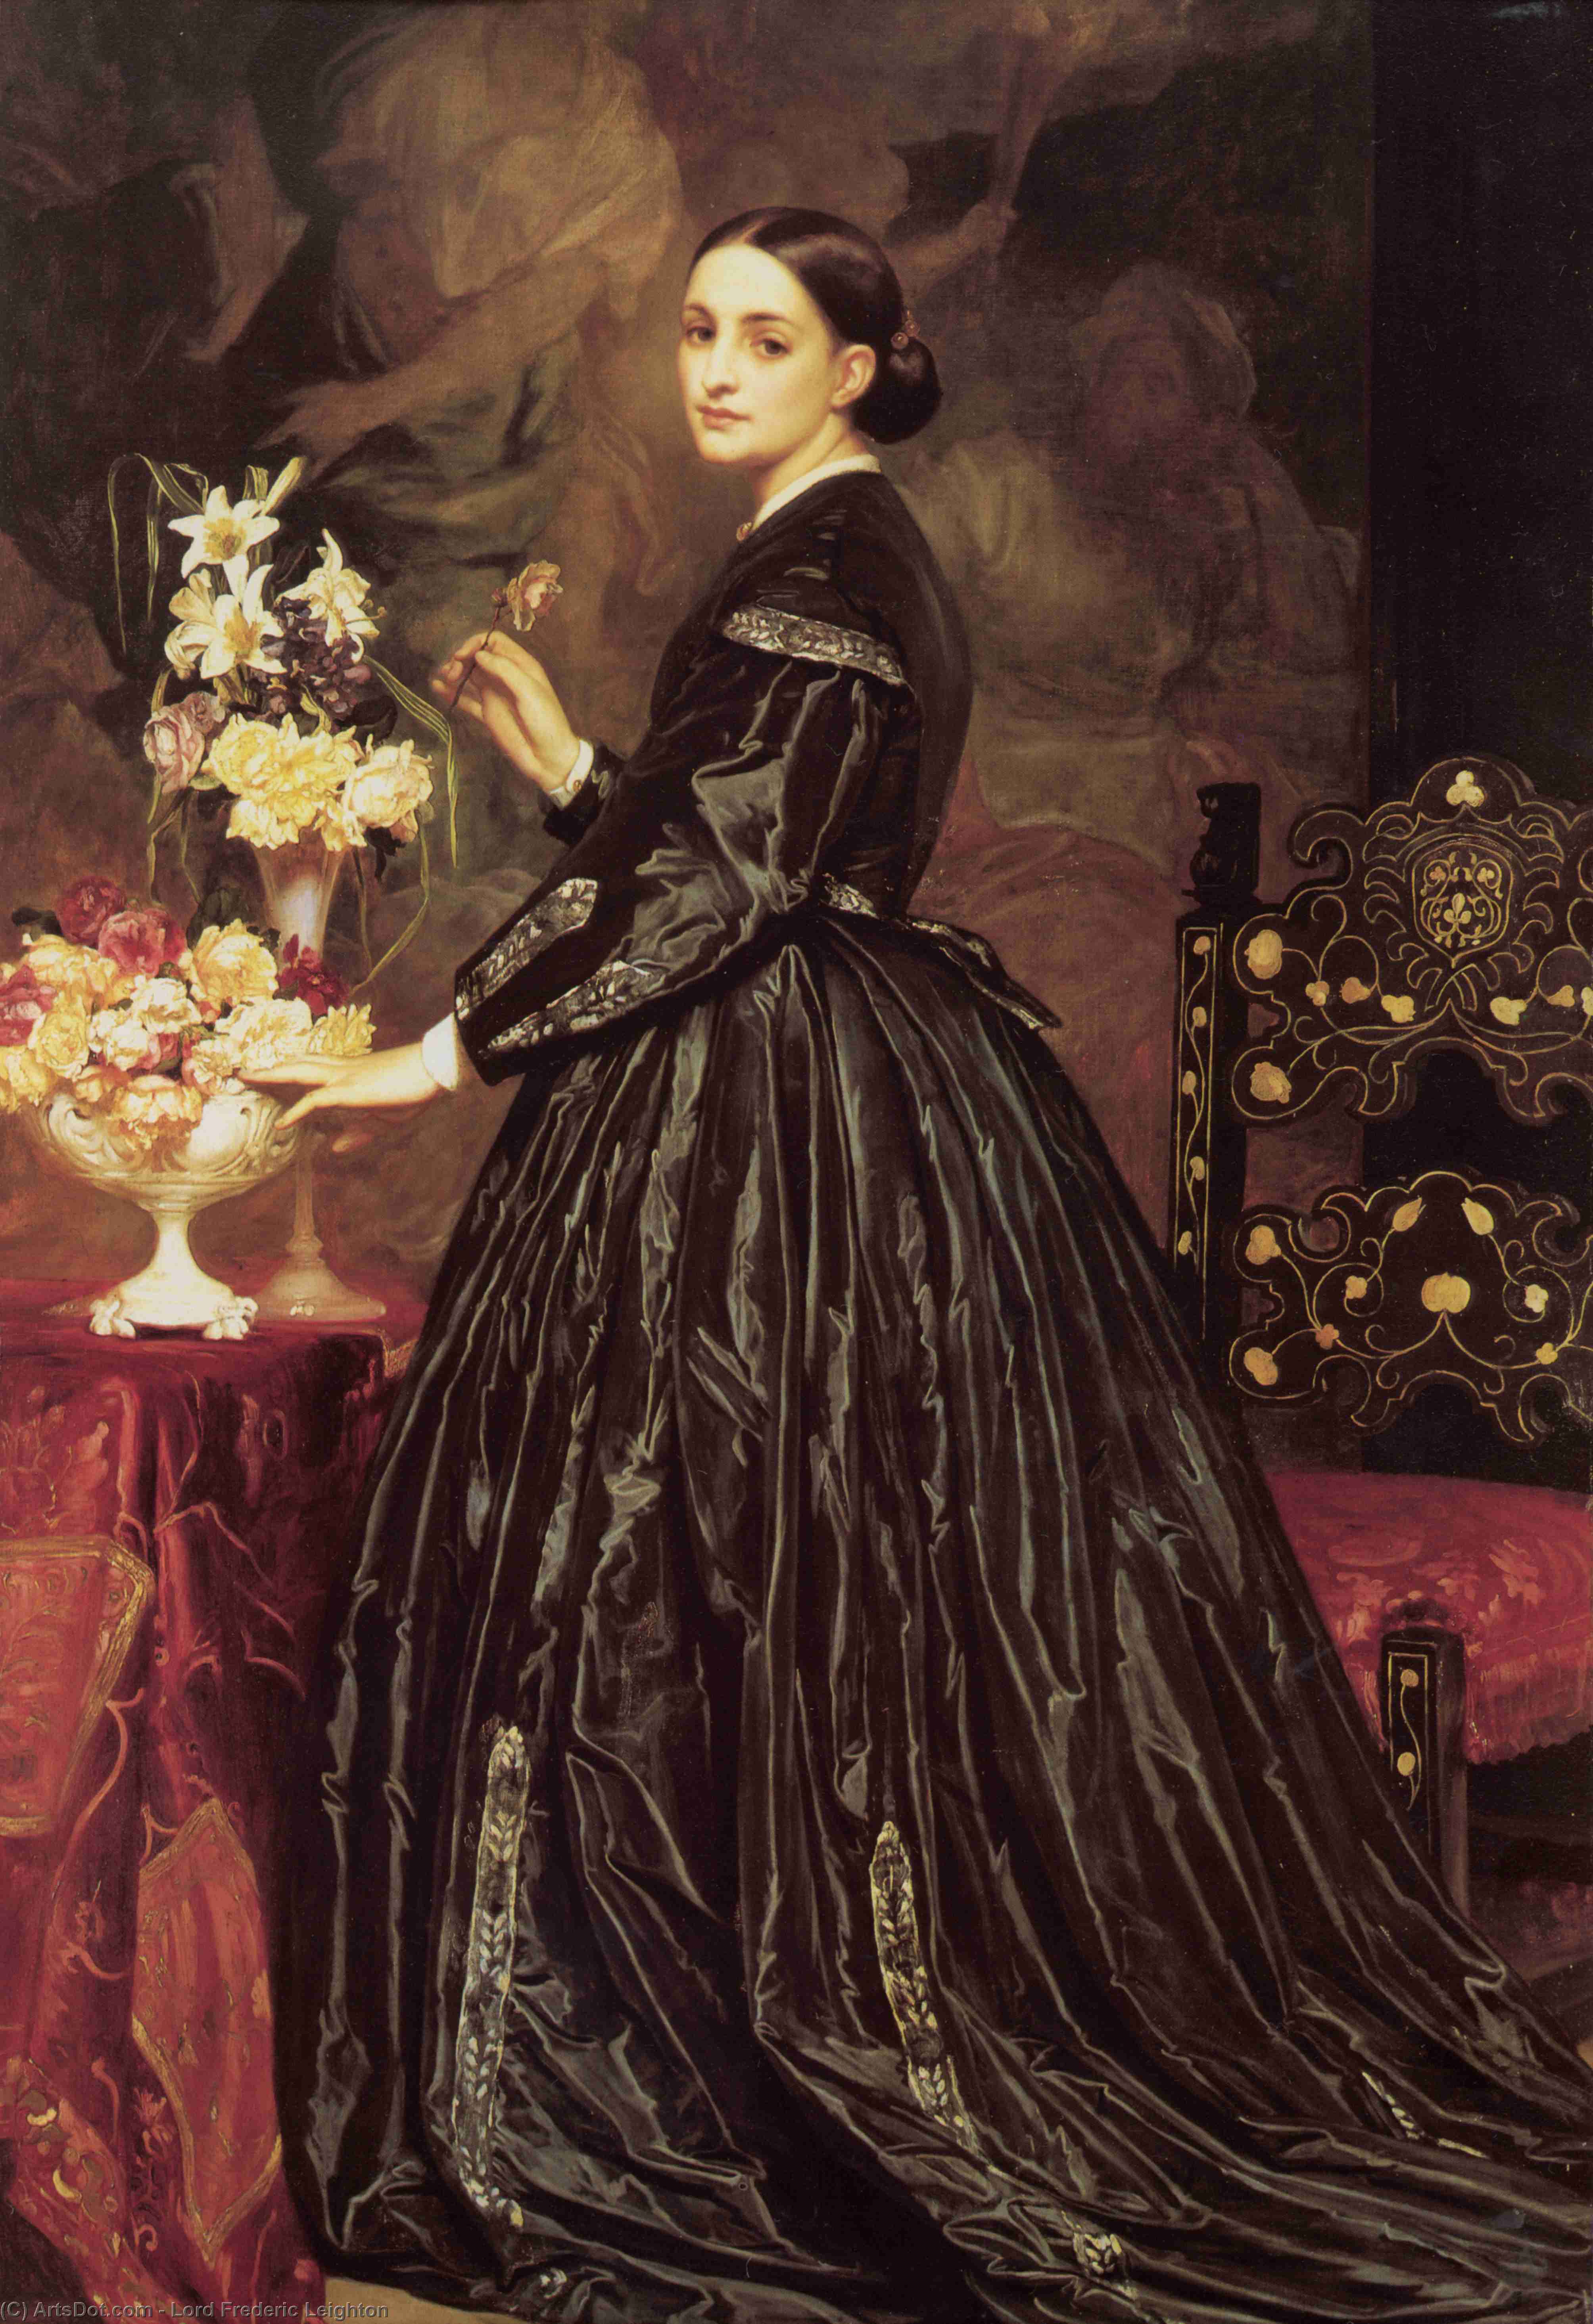 Buy Museum Art Reproductions Mrs James Guthrie by Lord Frederic Leighton | ArtsDot.com